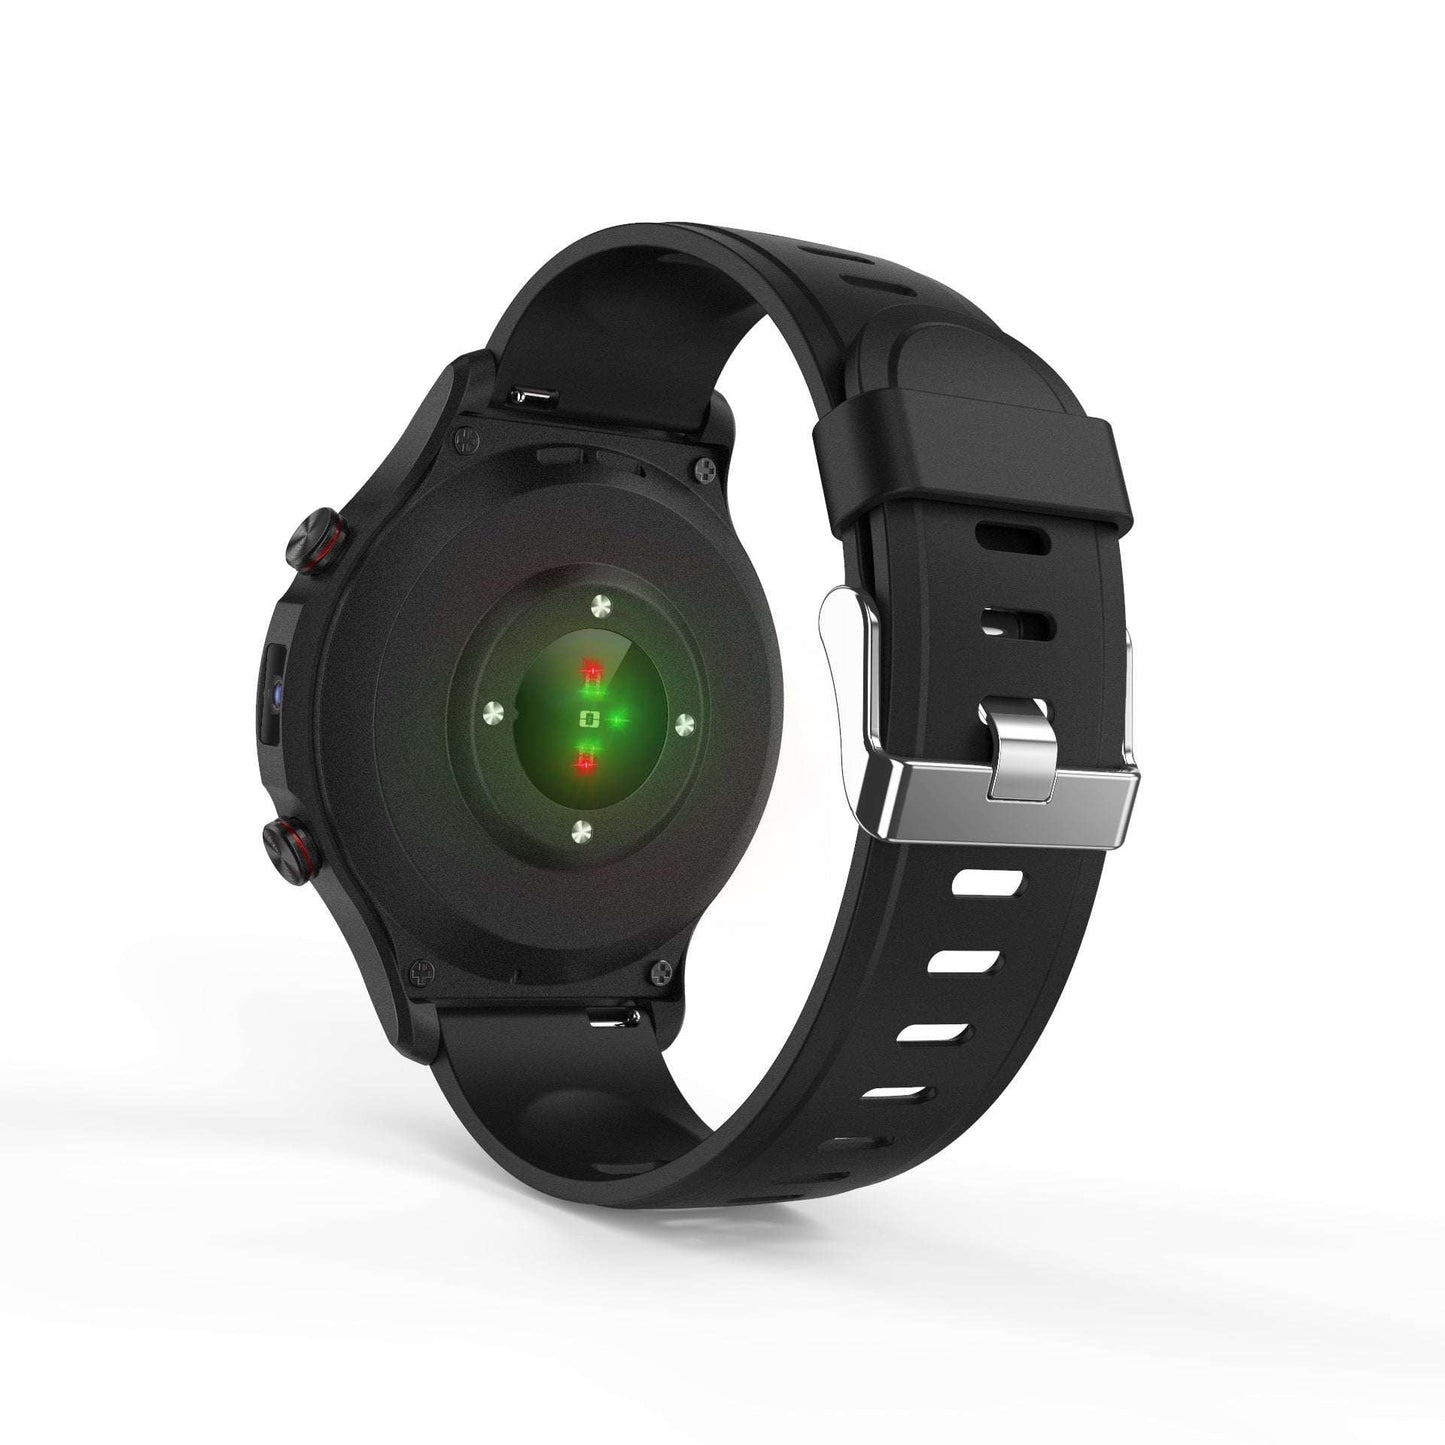 Card System Watch, Dual Core Smartwatch, GPS Smartwatch Online - available at Sparq Mart